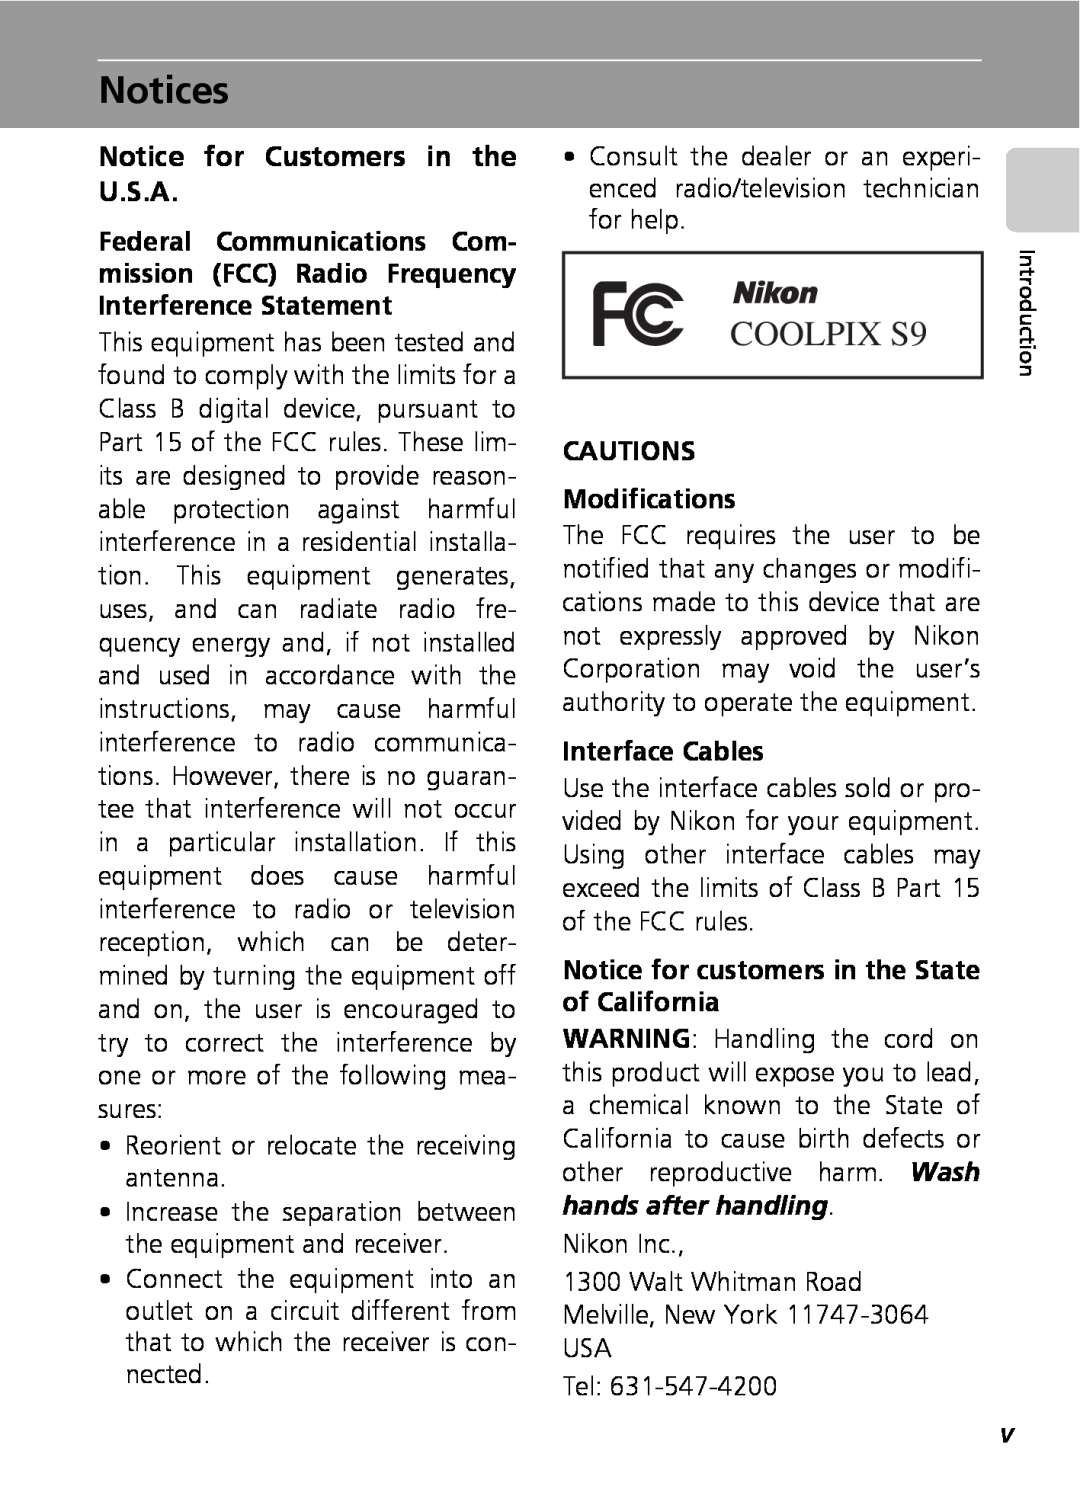 Nikon COOLPIXS9 manual Notices, Notice for Customers in the U.S.A, CAUTIONS Modifications, Interface Cables, COOLPIX S9 